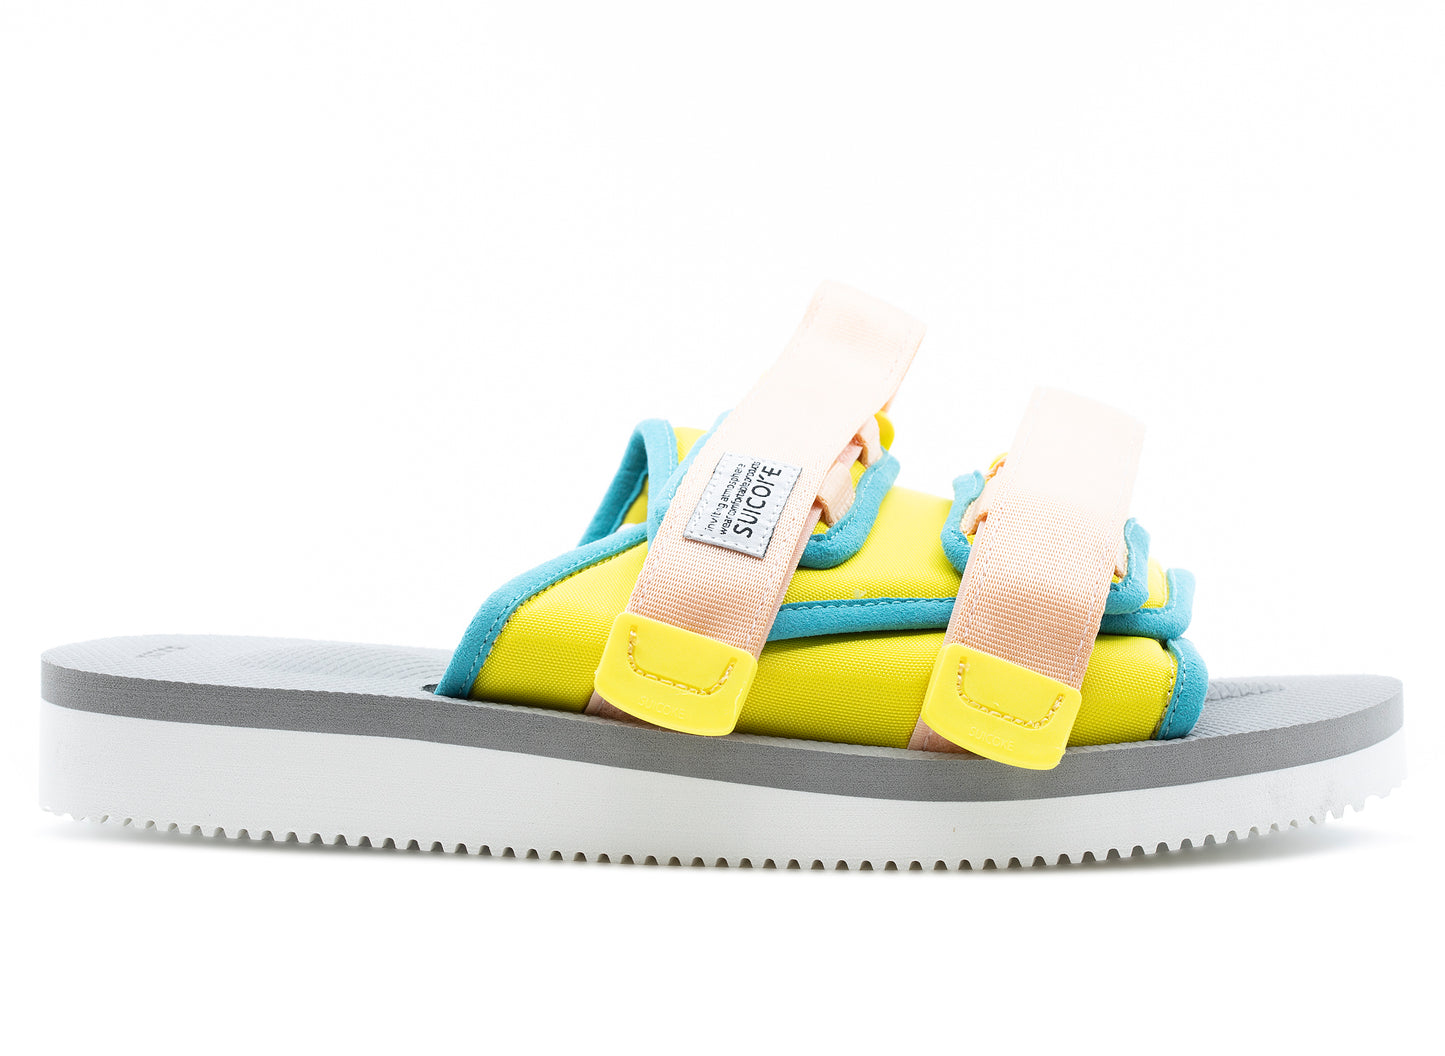 Suicoke Moto-Cab Sandals in Yellow